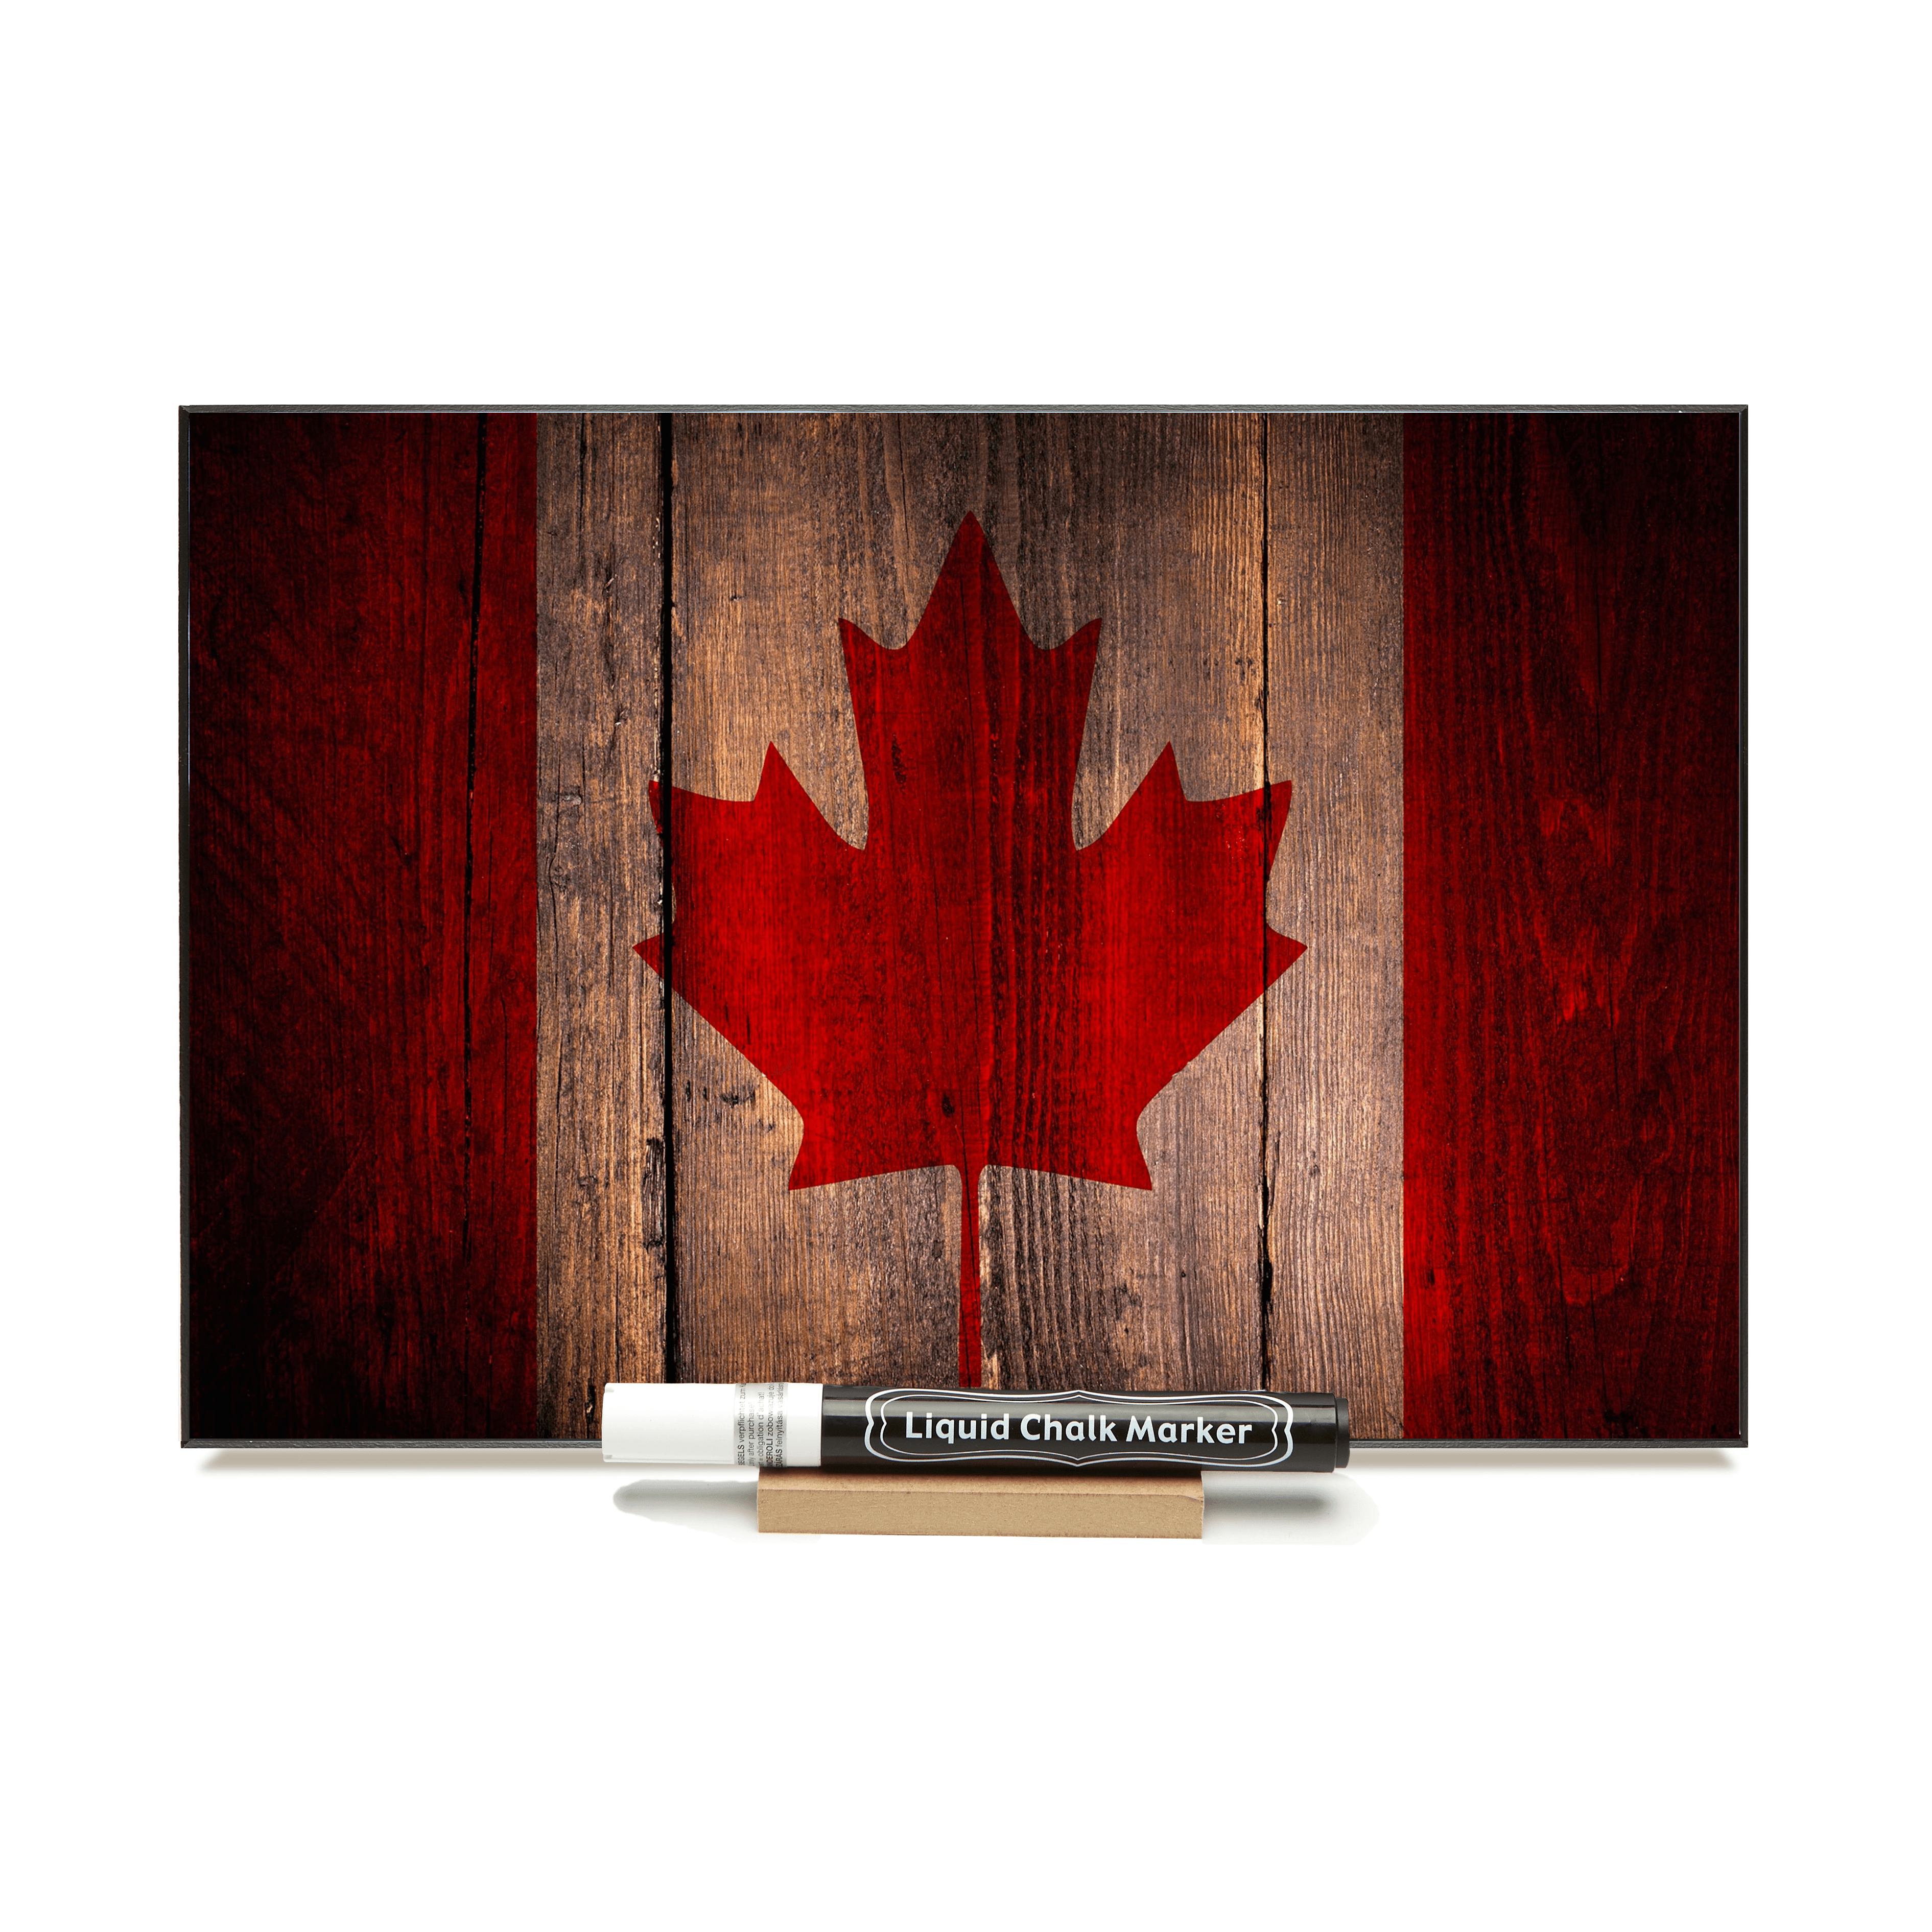 "VINTAGE CANADA FLAG" - Includes Chalkboard, Chalk Marker and Stand